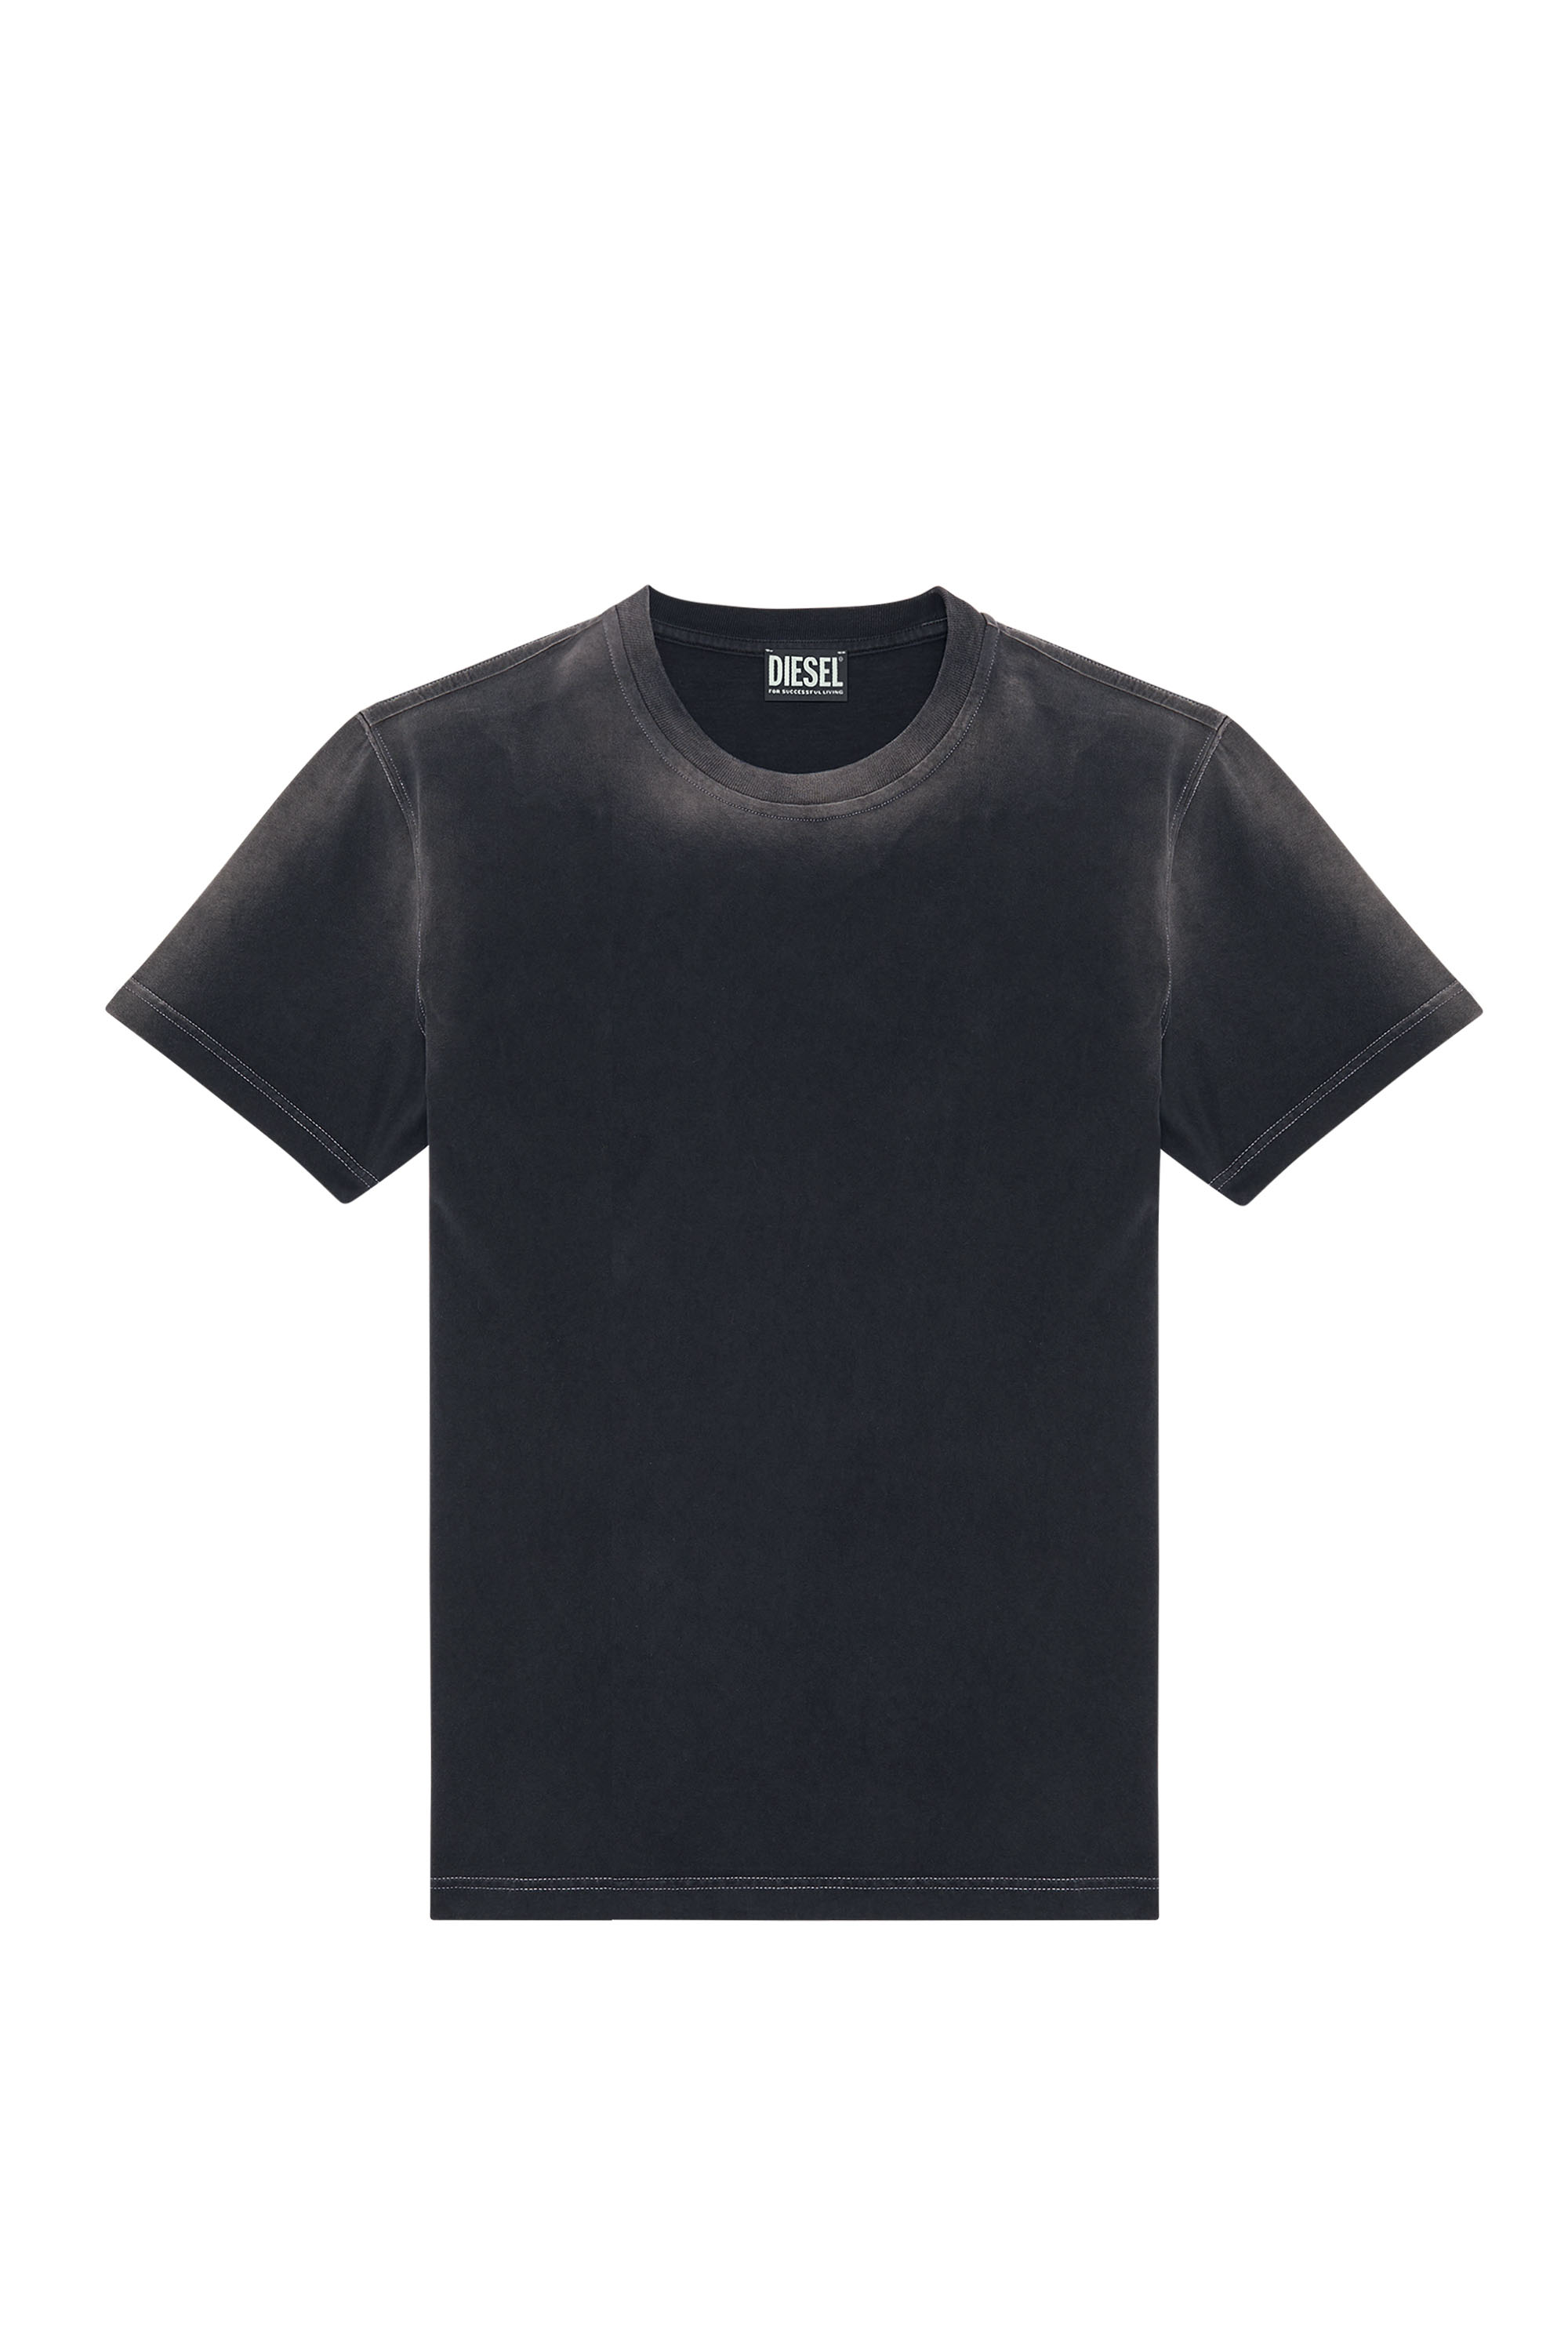 Homme Vêtements Diesel Homme Tee-shirts & Polos Diesel Homme Tee-shirts Diesel Homme Tee-shirts Diesel Homme Tee-shirt DIESEL 3 L gris 